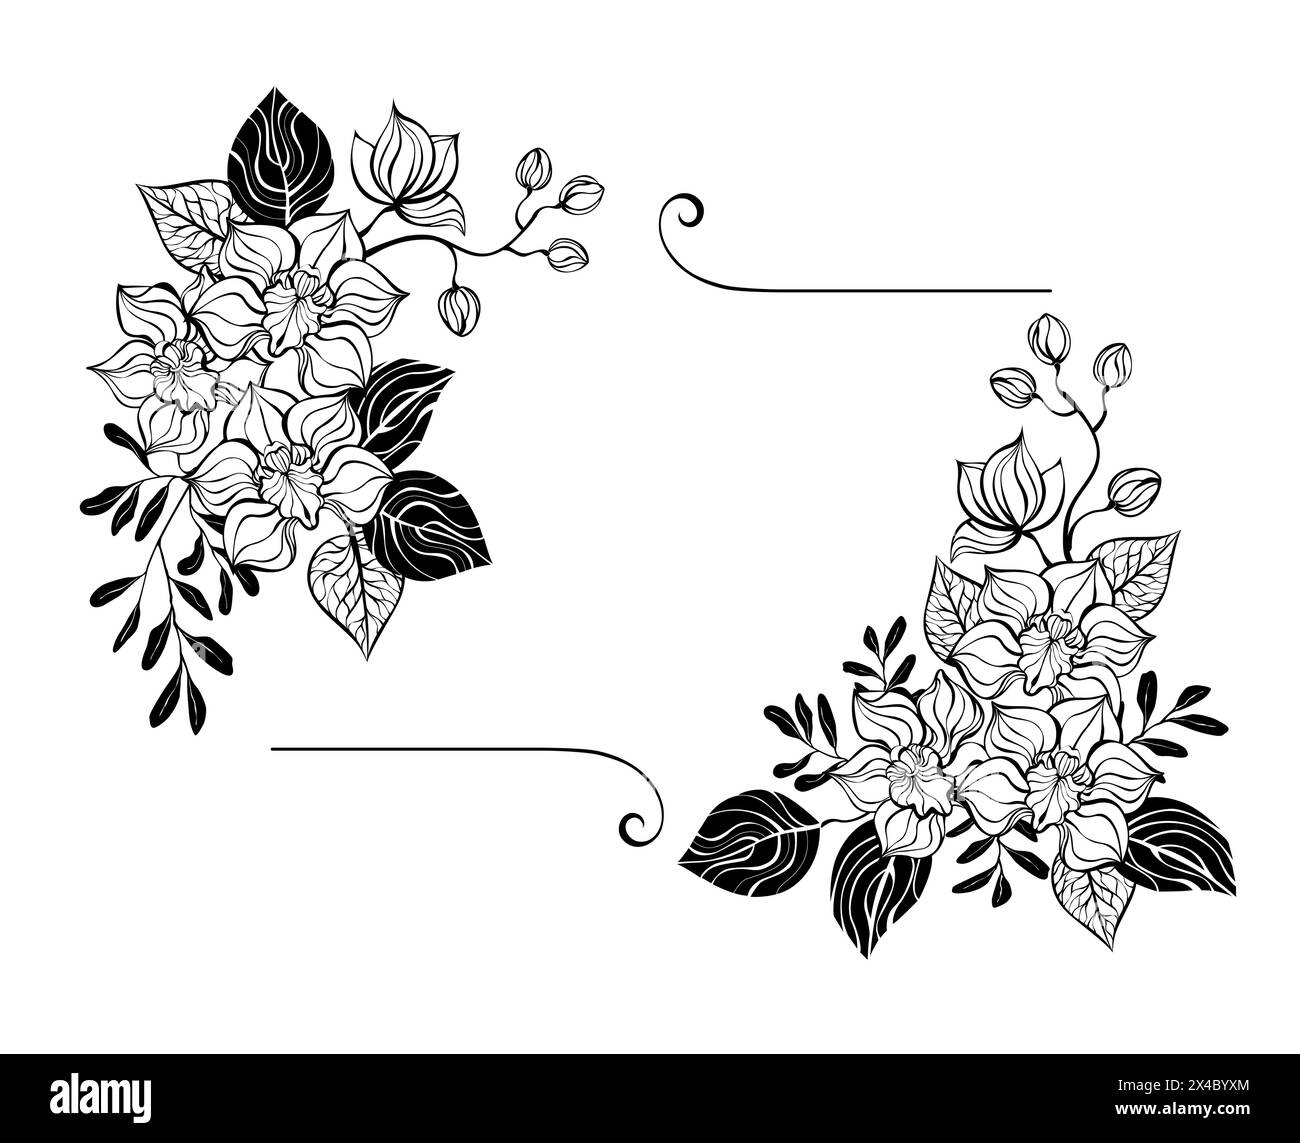 Rectangular floral composition of artistically drawn, black contoured orchids with silhouetted pistachio and eucalyptus twigs on white background. Con Stock Vector